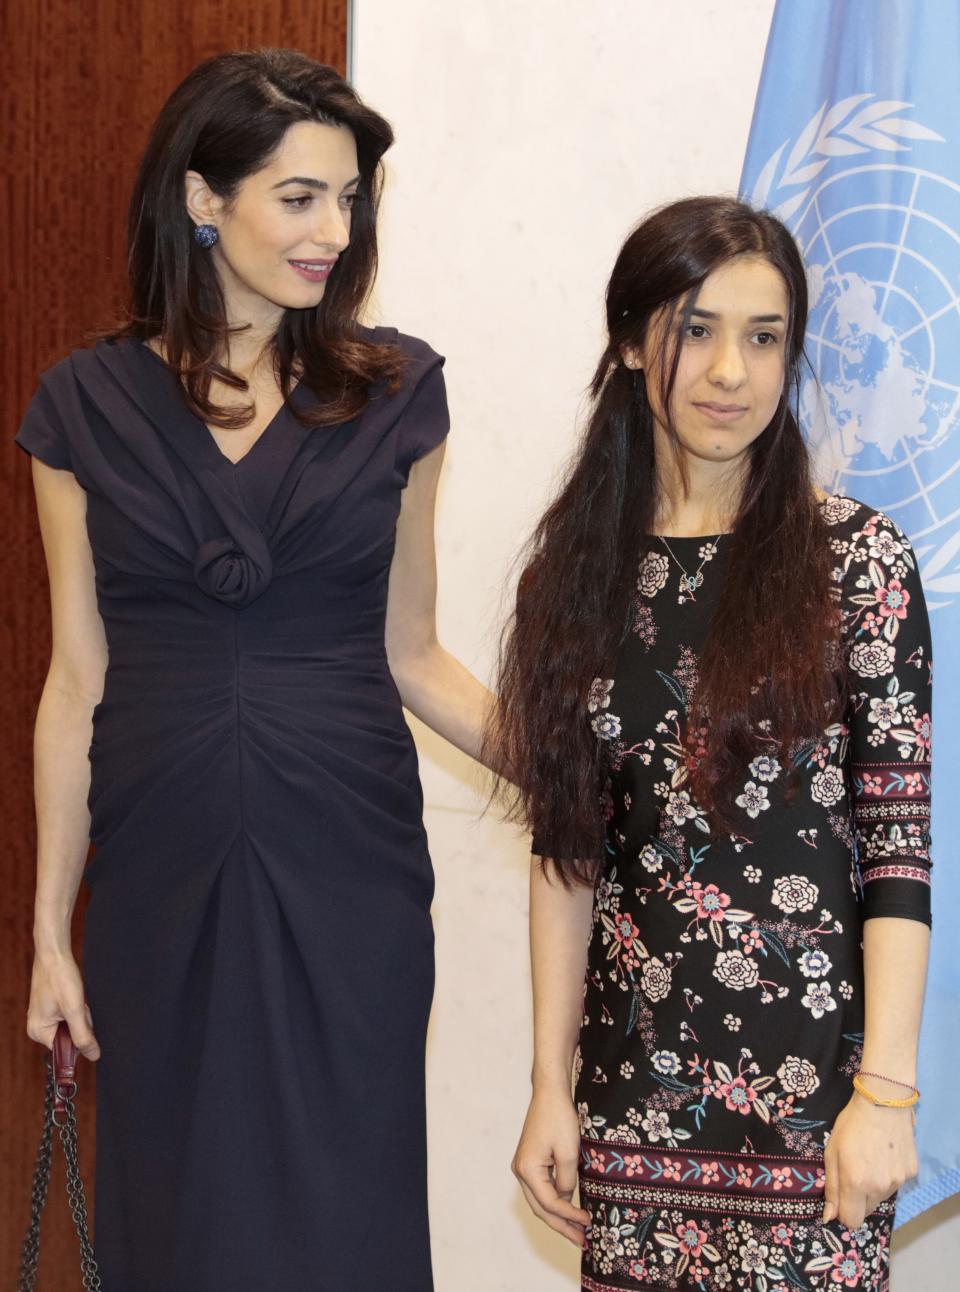 Amal Clooney's £168,000 maternity wardrobe is her masterful ploy to raise awareness of human rights abuses